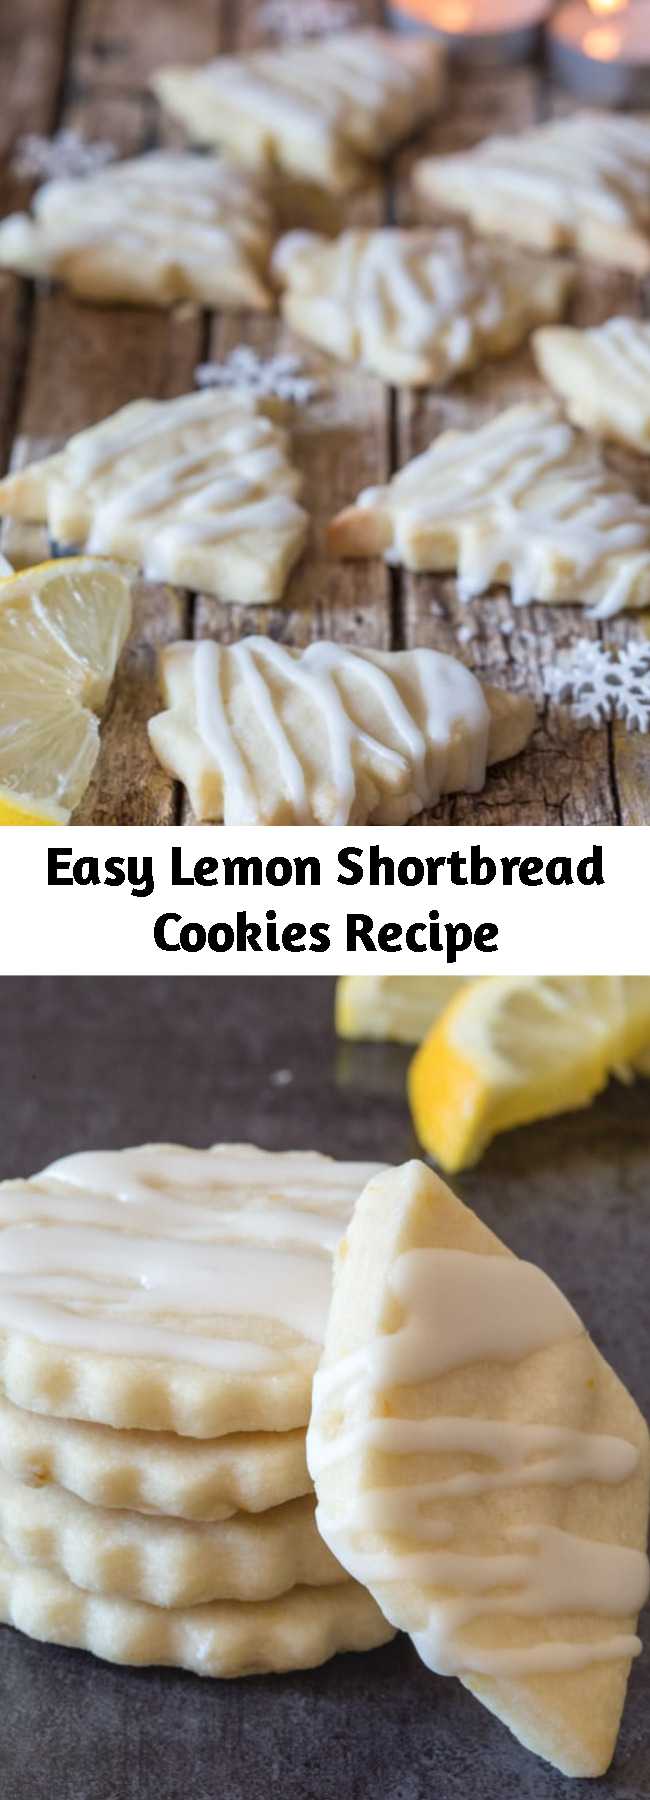 Easy Lemon Shortbread Cookies Recipe - Shortbread Cookies are a must and these Lemon Shortbread are the perfect Lemon Lovers melt in your mouth Cookie.